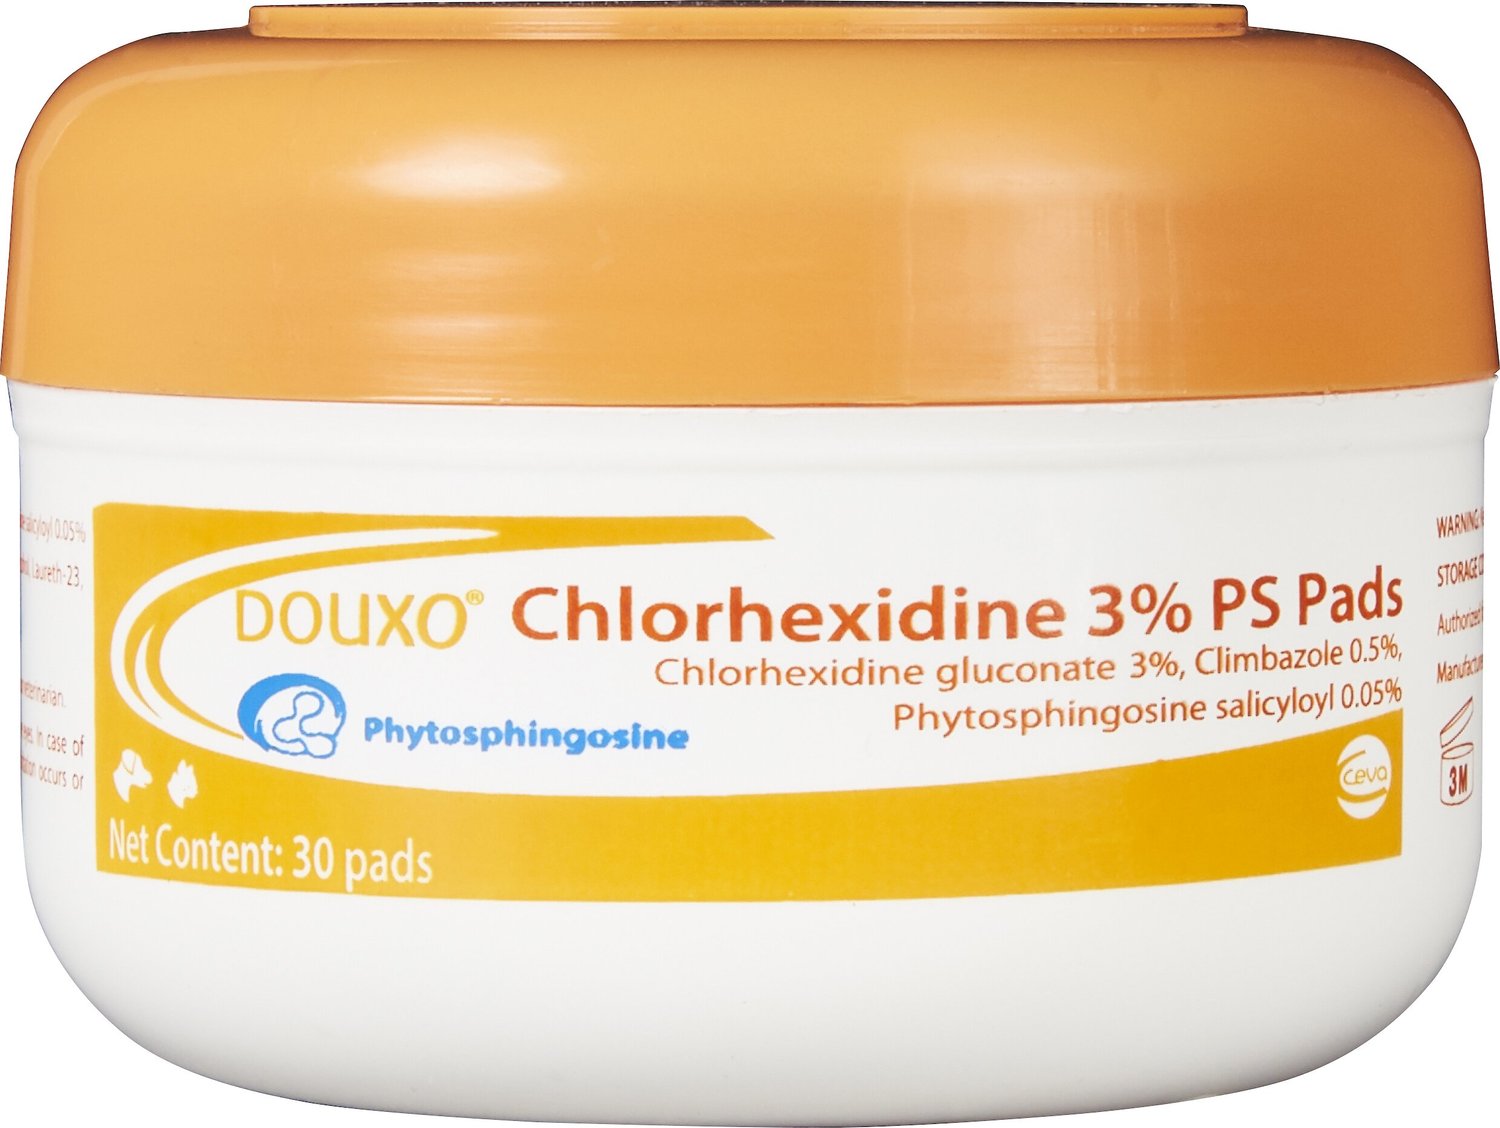 DOUXO Chlorhexidine 3% PS Pads for Dogs 